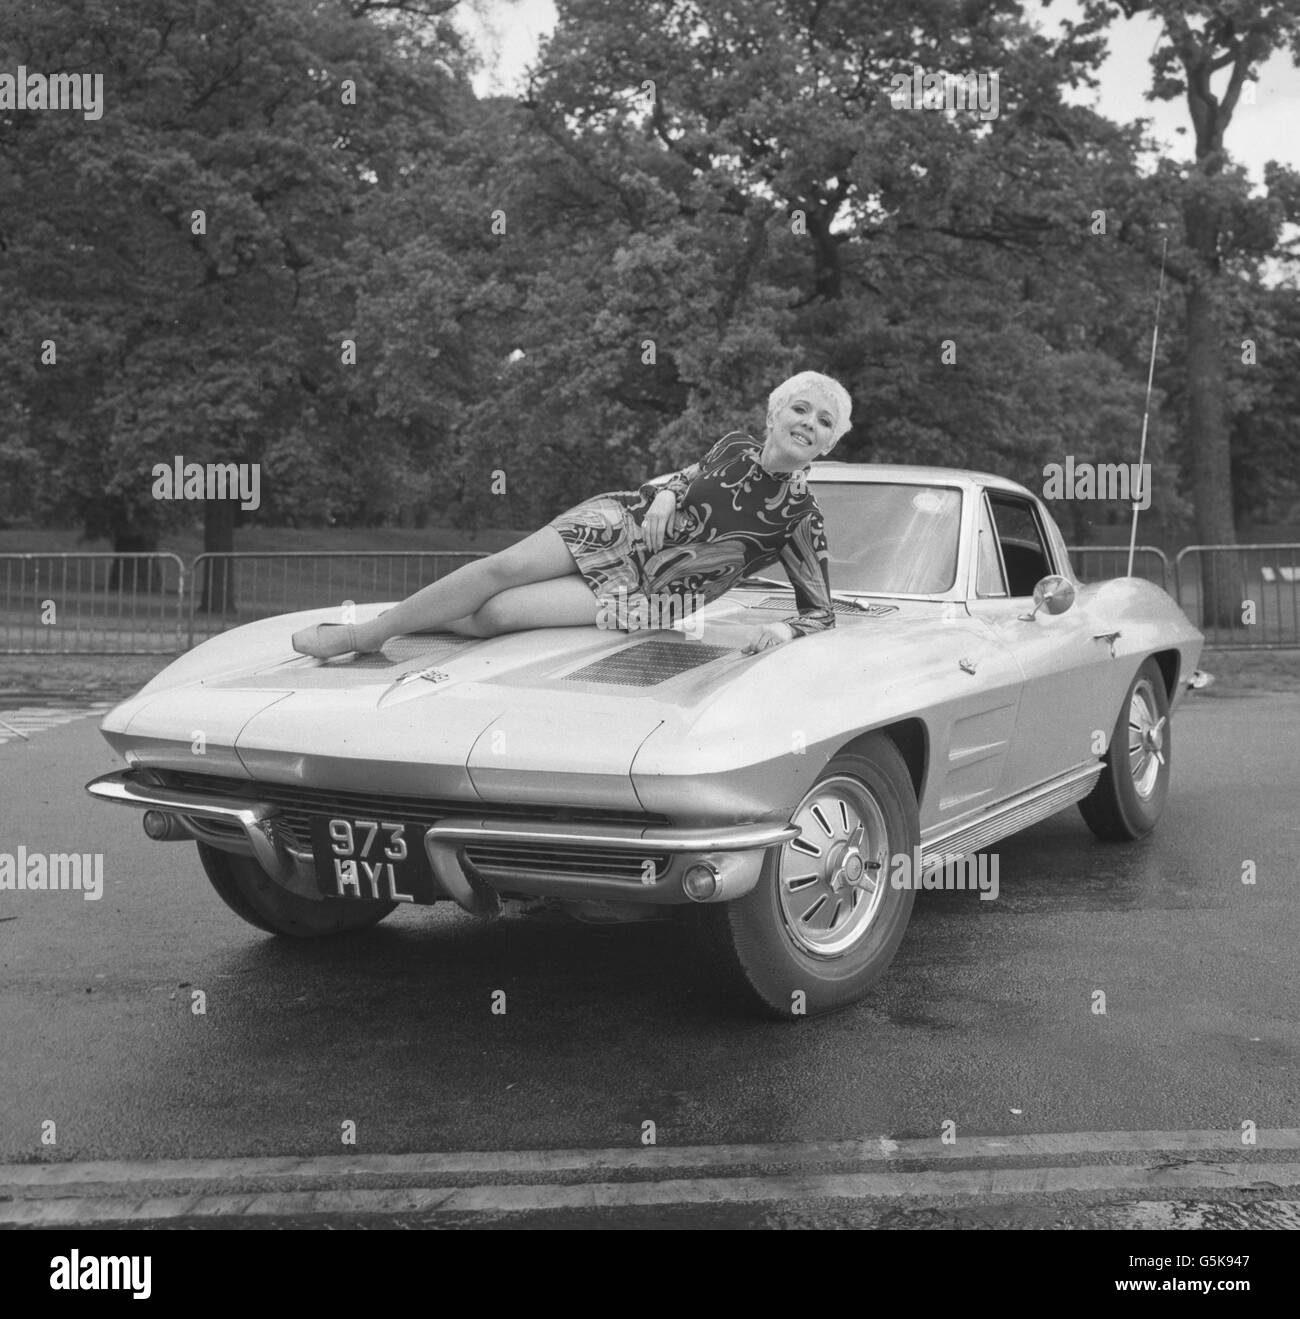 Lisa Noble reclines on the bonnet of her Chevrolet Stingray car in Hyde Park, London. A former telephone switchboard operator, she was given the vehicle by her husband to celebrate her success as a cabaret performer at the Showboat Theatre Restaurant in the Strand. *Low res scan - hi res available on request* Archive-PA128368-1 Stock Photo